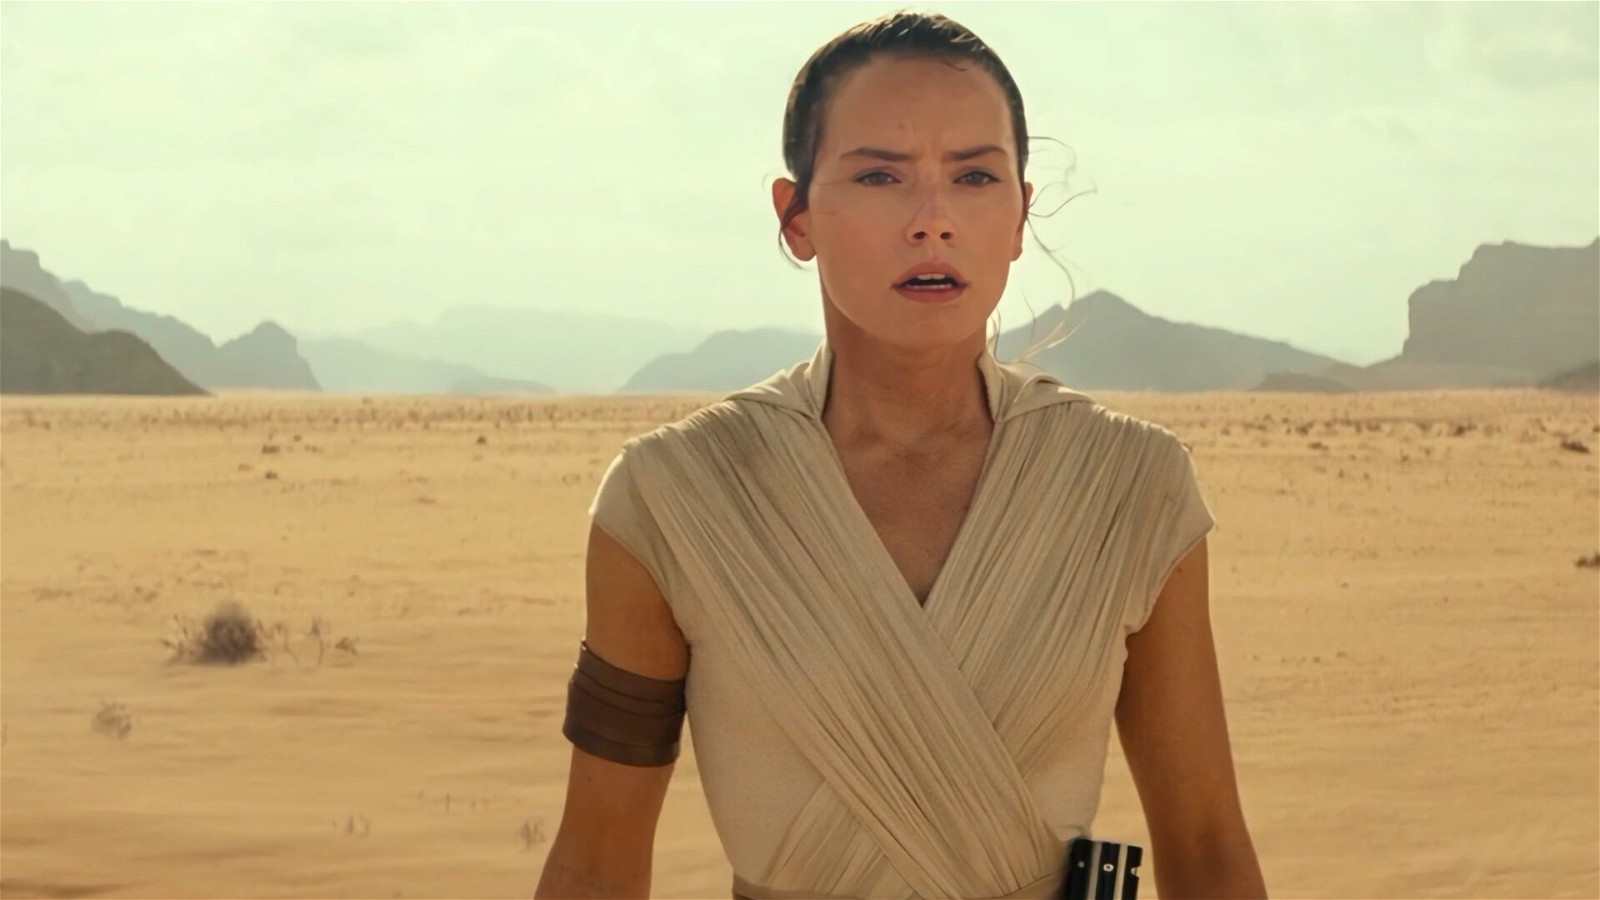 Daisy Ridley is coming back as Rey in a new Star Wars film